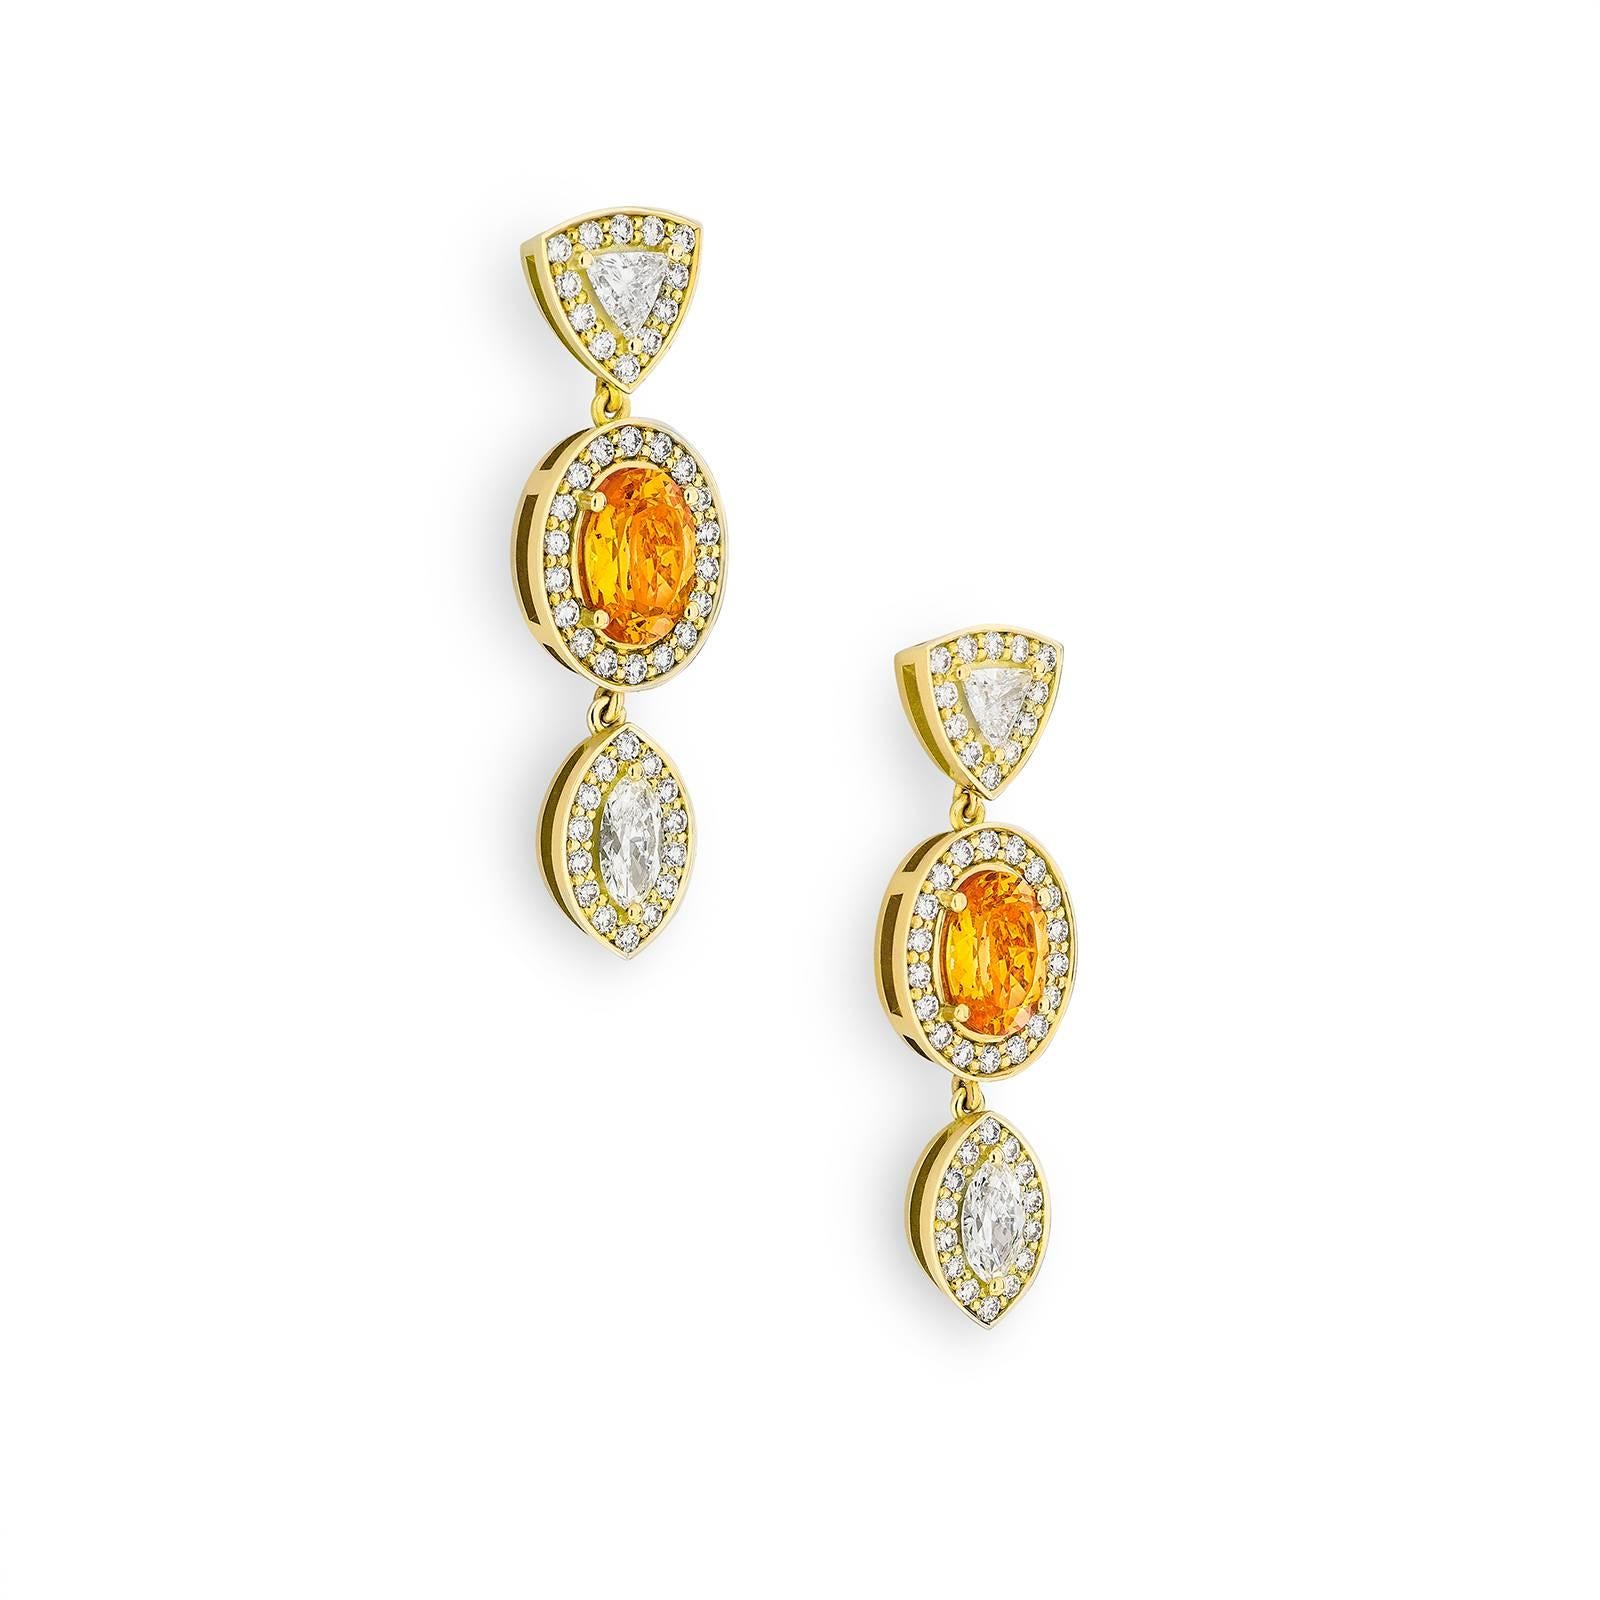 Inspired by the striking plumage of the Raggiana Bird of Paradise, the Empress Earrings combine tropical sensibilities with timeless elegance. Using a classic combination of 4.6 tct orange garnets, 1.3 tct natural marquise and trillion cut diamonds